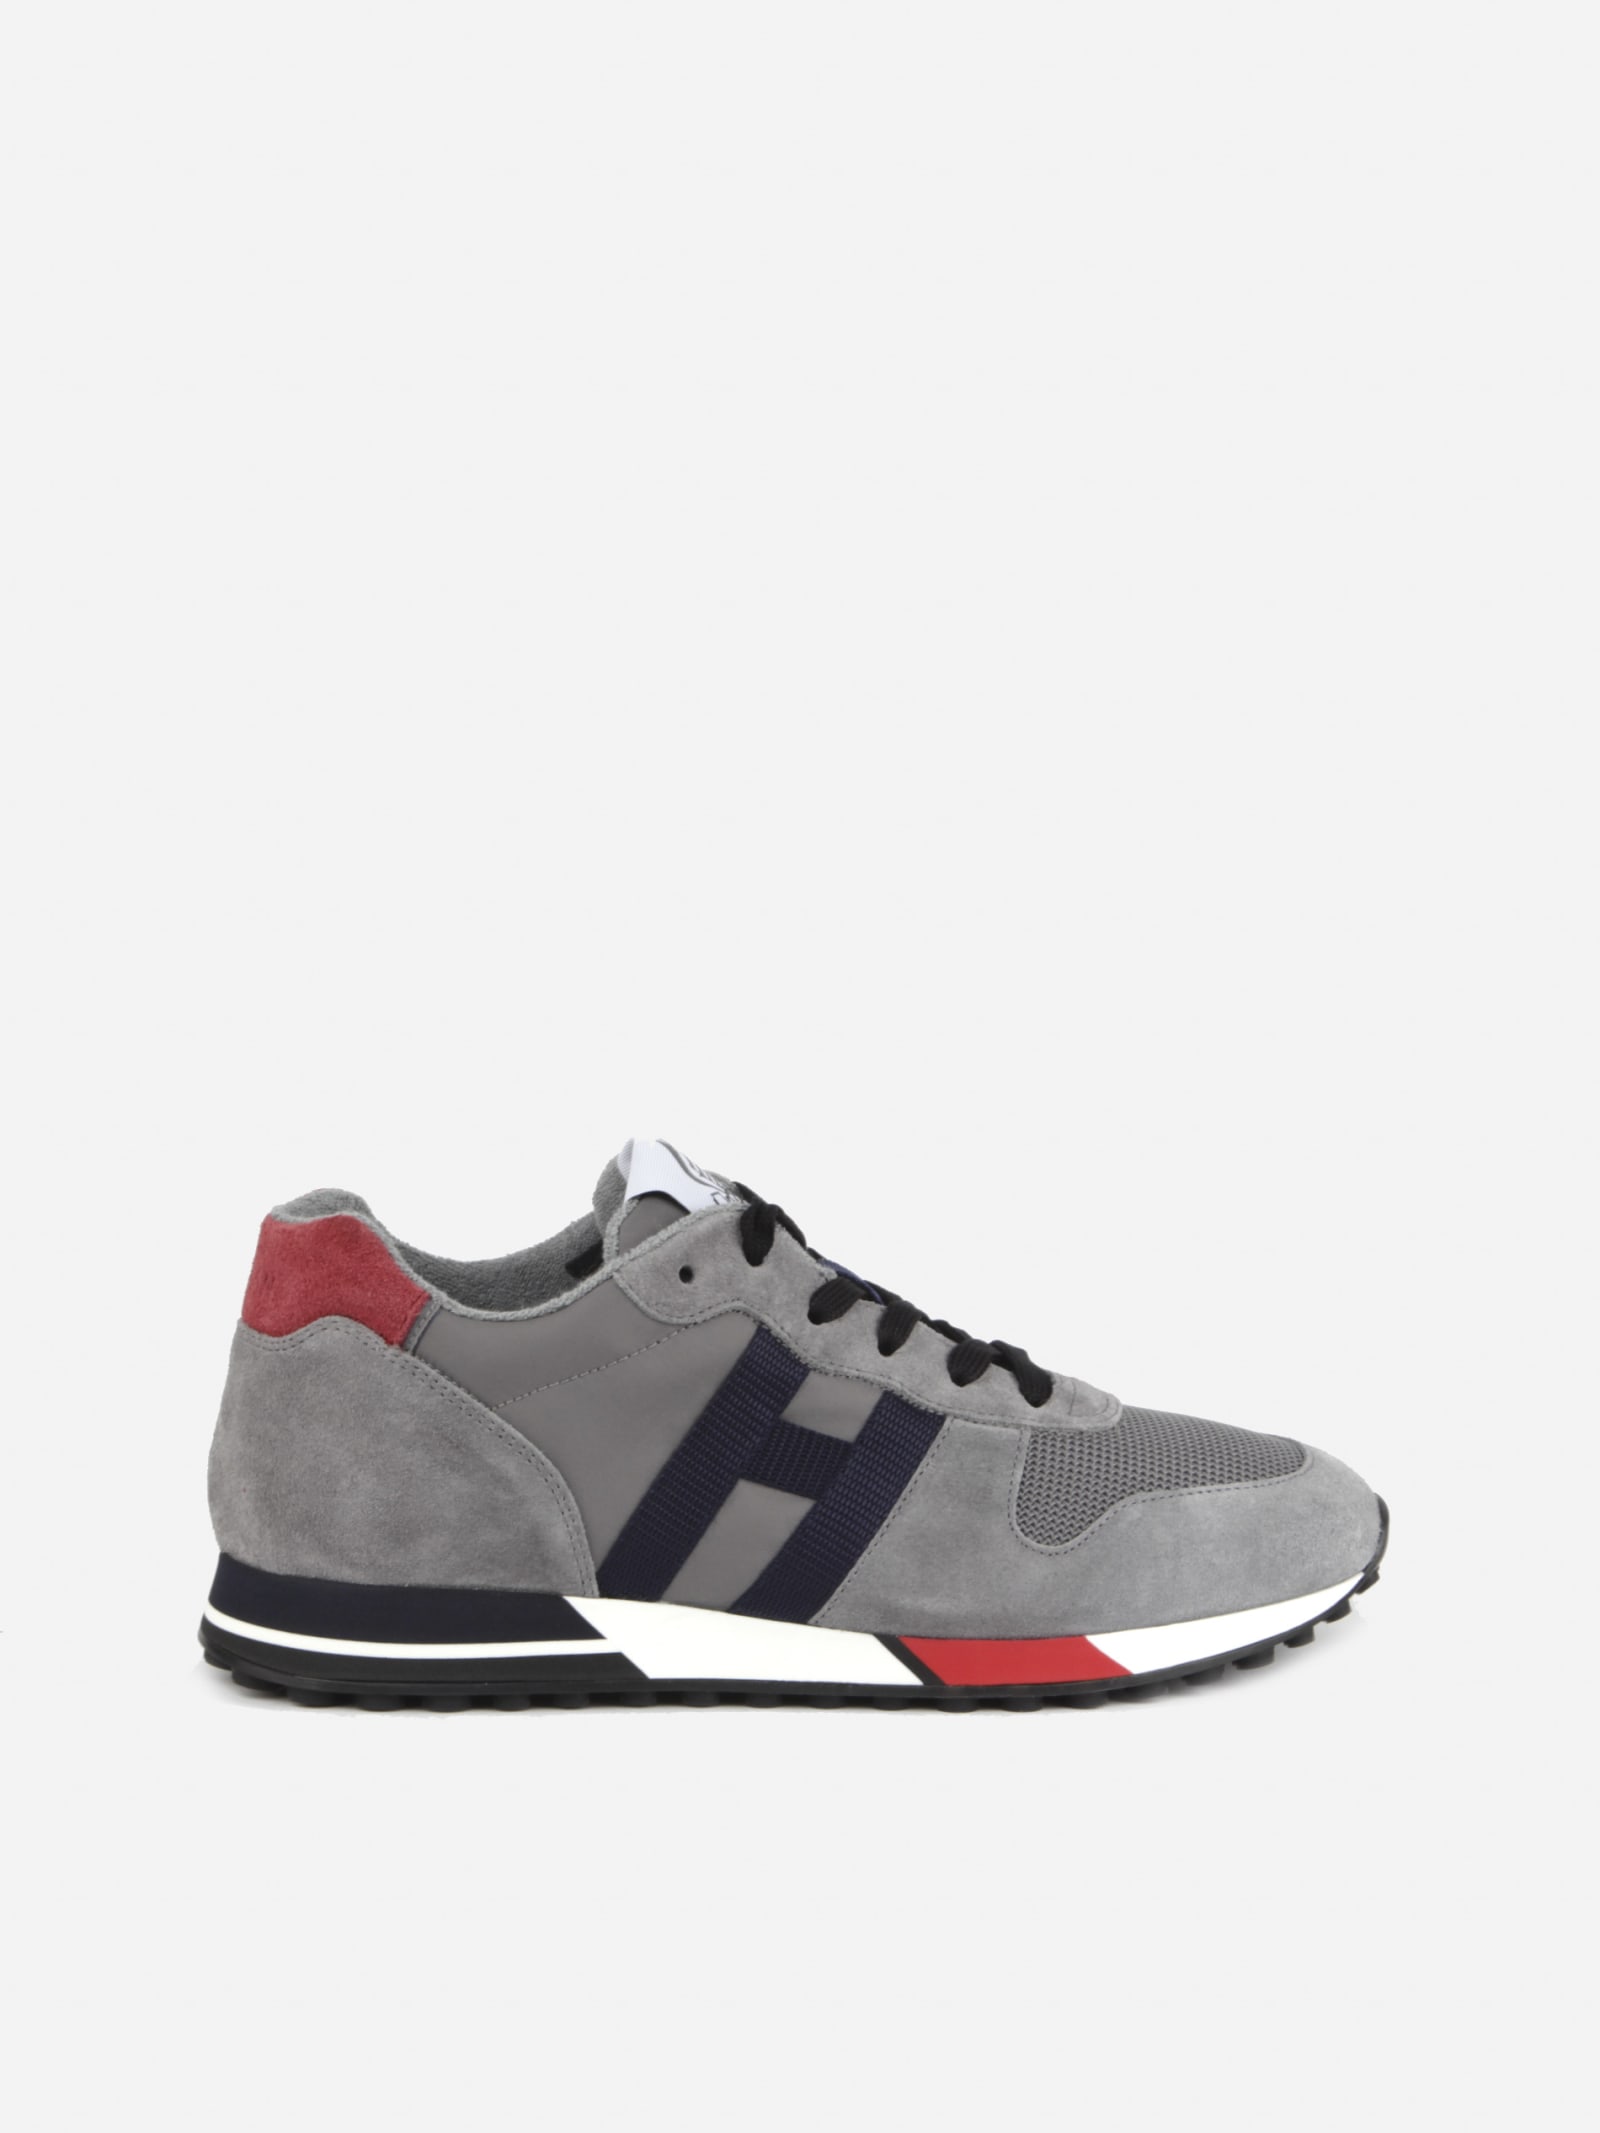 HOGAN H383 SNEAKERS IN SUEDE WITH TECHNICAL FABRIC INSERTS,HXM3830AN51 JHM50CS